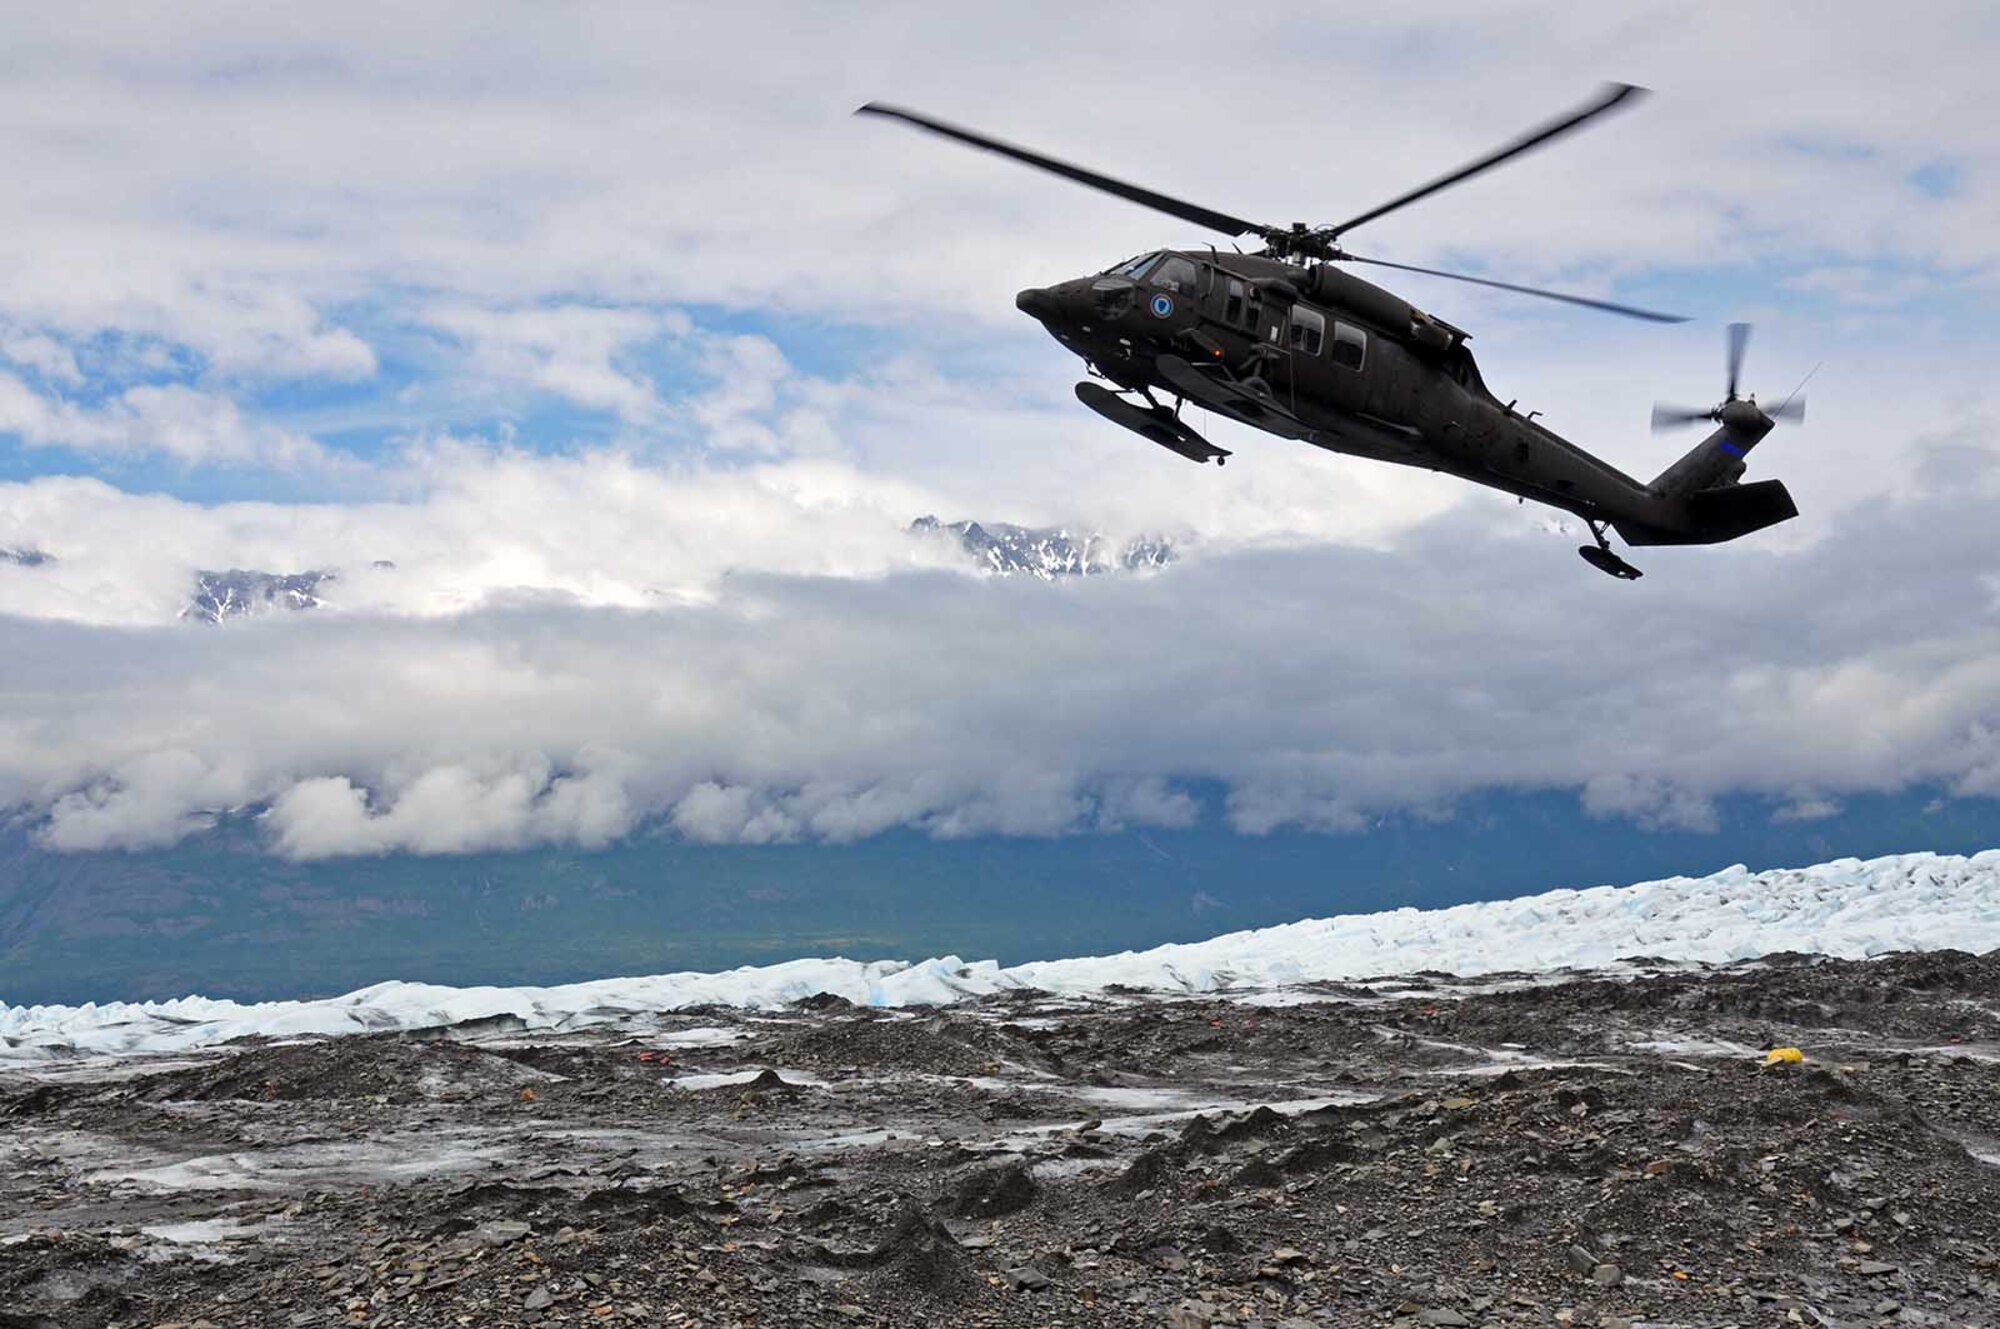 An Alaska Army National Guard UH-60 Black Hawk helicopter lands on top of Colony Glacier near Anchorage, Alaska to pick up personnel as part of Operation Colony Glacier. The operation is a mission to recover human remains and remove debris from a 1952 crash of a U.S. Air Force C-124 Globemaster II on the glacier with 52 servicemembers on board. The recovery effort has taken place every summer since 2012 by personnel from Alaskan Command, the Alaska National Guard, Air Force Mortuary Affairs Operations, U.S. Army Alaska, 673d Air Base Wing, 3d Wing and Detachment 1, 66 Training Squadron. (U.S. Air Force photo/Capt. Anastasia Wasem)